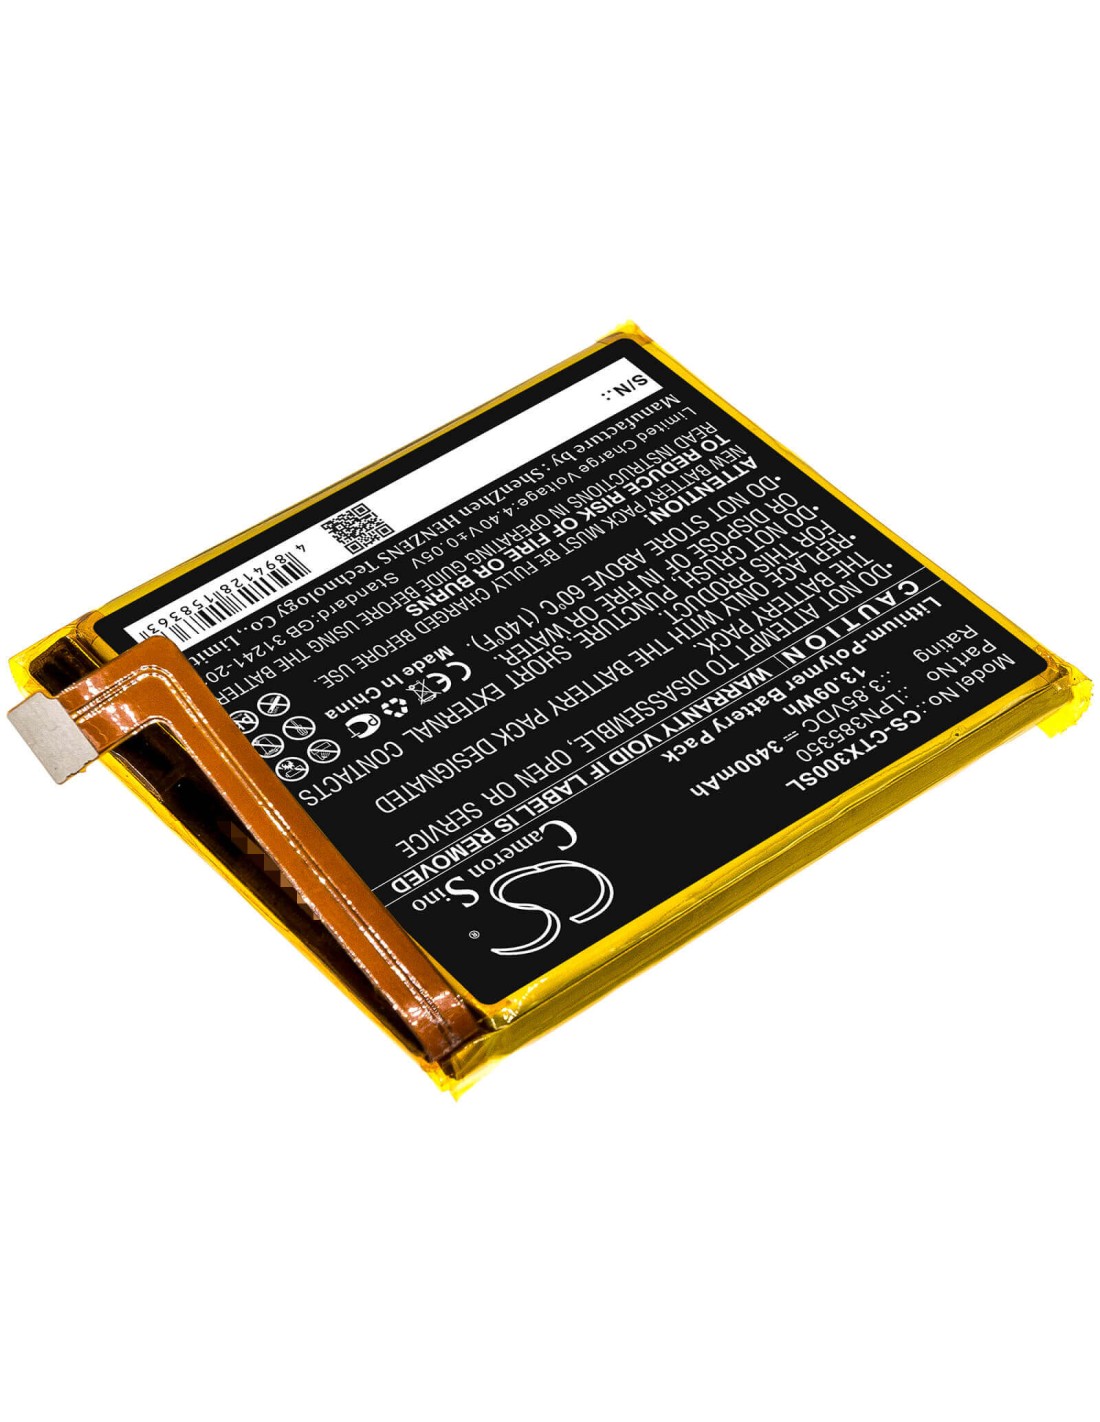 Battery for Crosscall, Action X3, Action-x3, Core X3 3.85V, 3400mAh - 13.09Wh